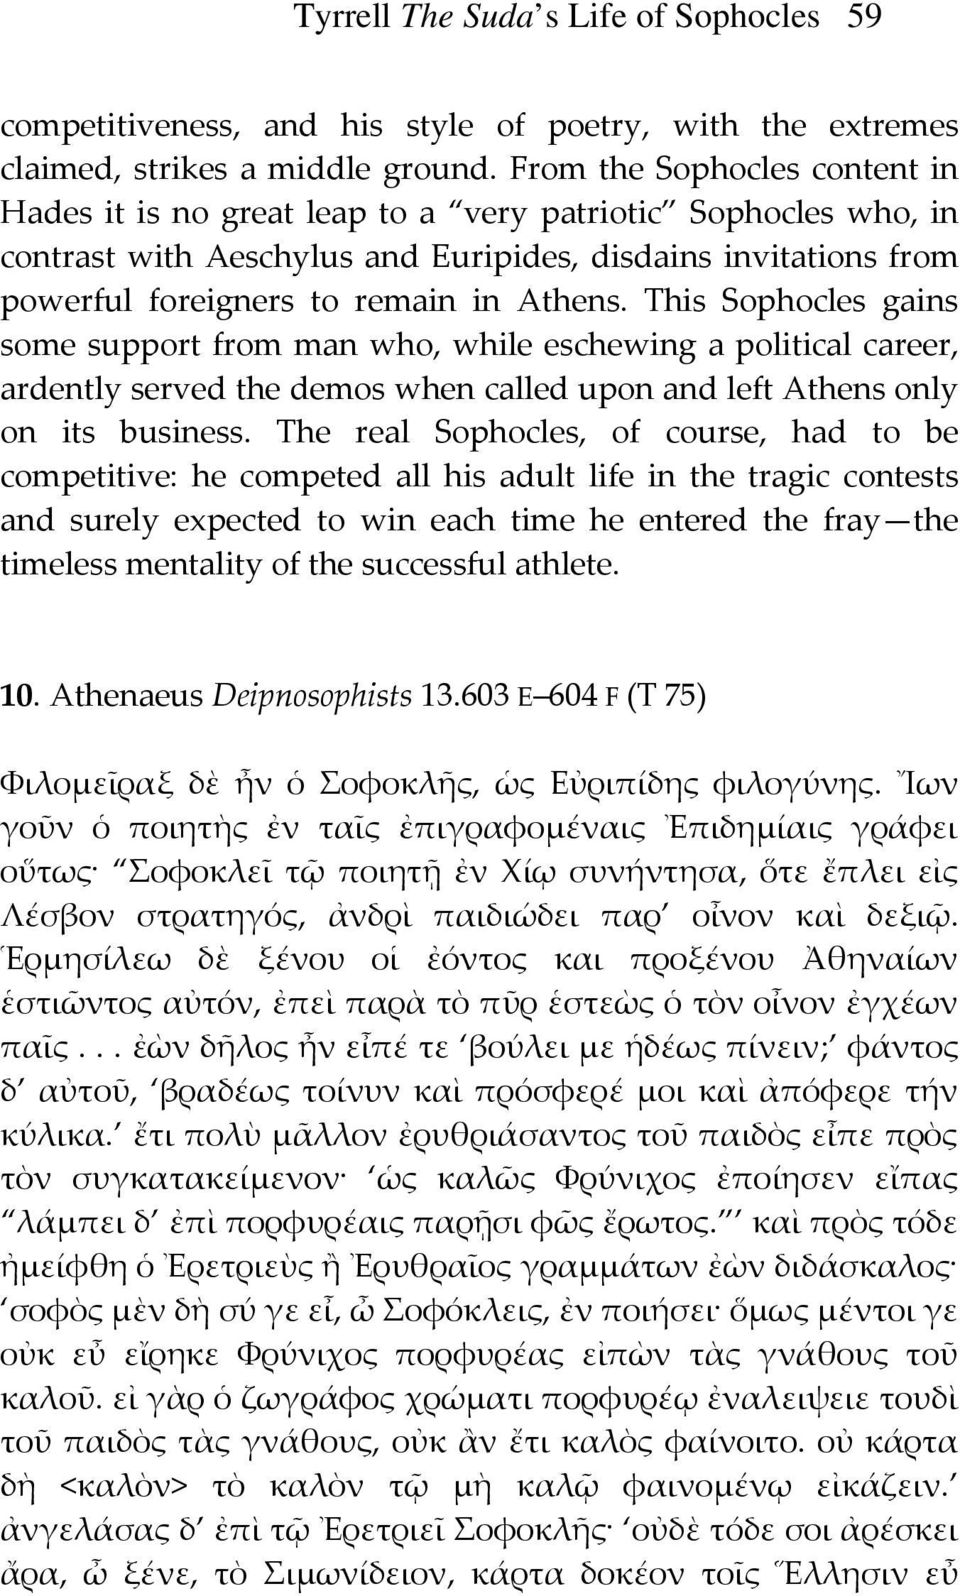 This Sophocles gains some support from man who, while eschewing a political career, ardently served the demos when called upon and left Athens only on its business.